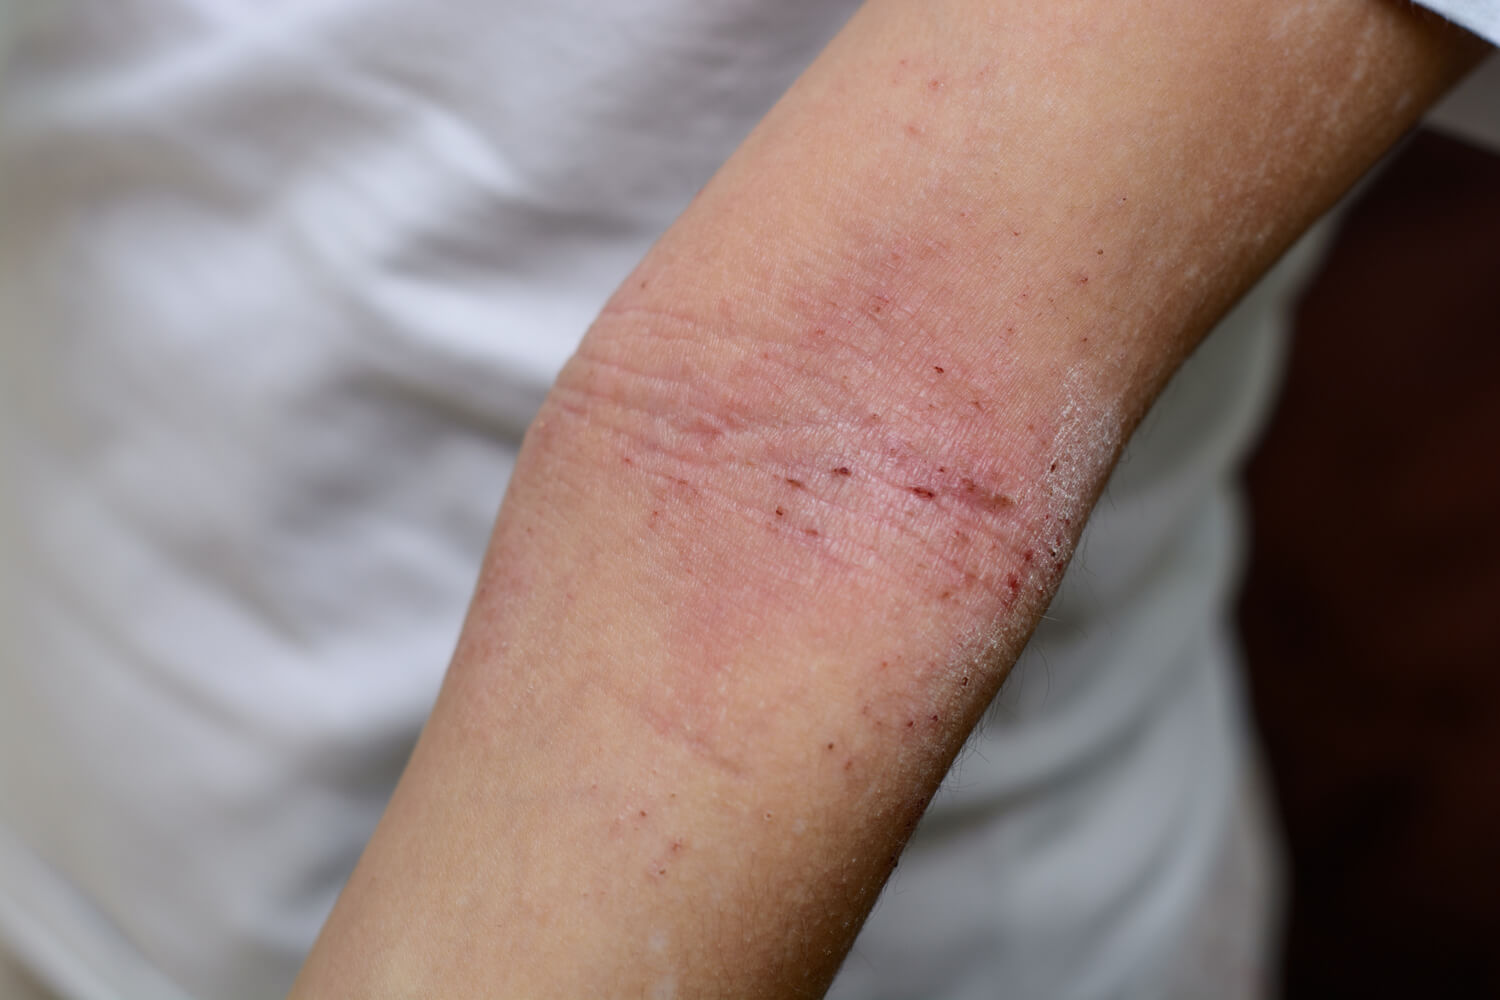 A person's inner elbow showing signs of an eczema rash